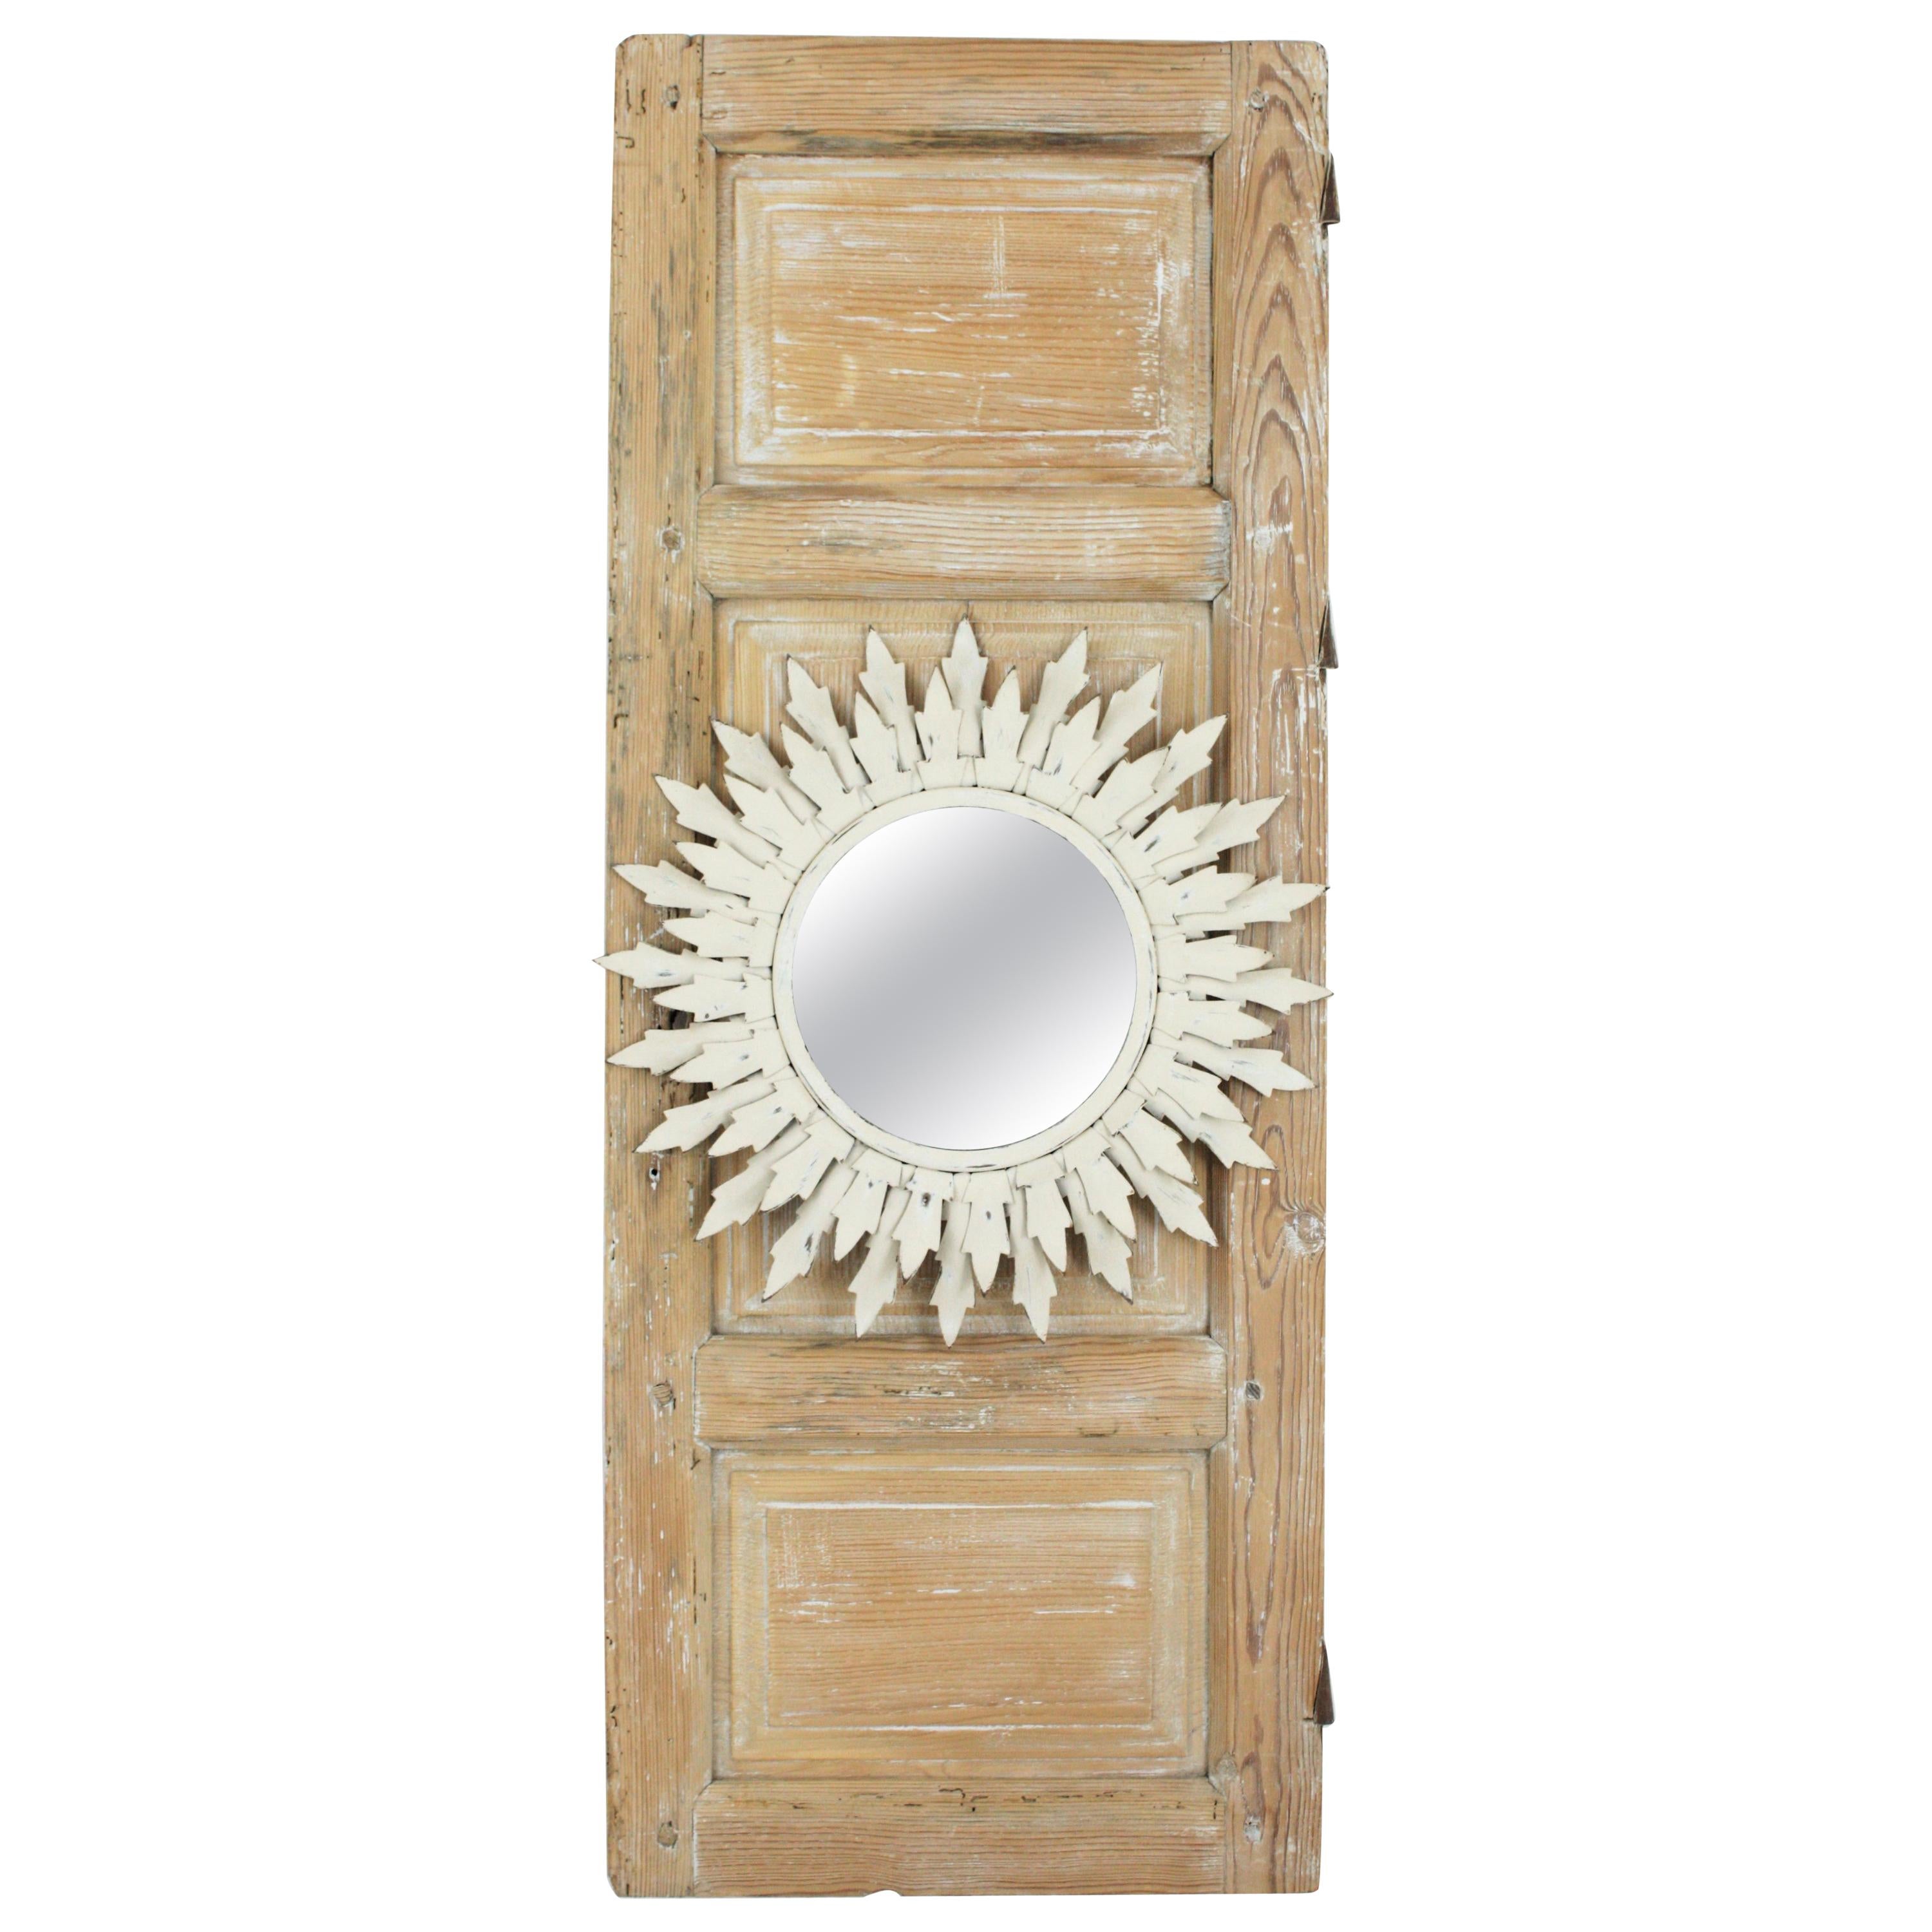 Spanish White Sunburst Mirror Framed by a Wood Patinated Door